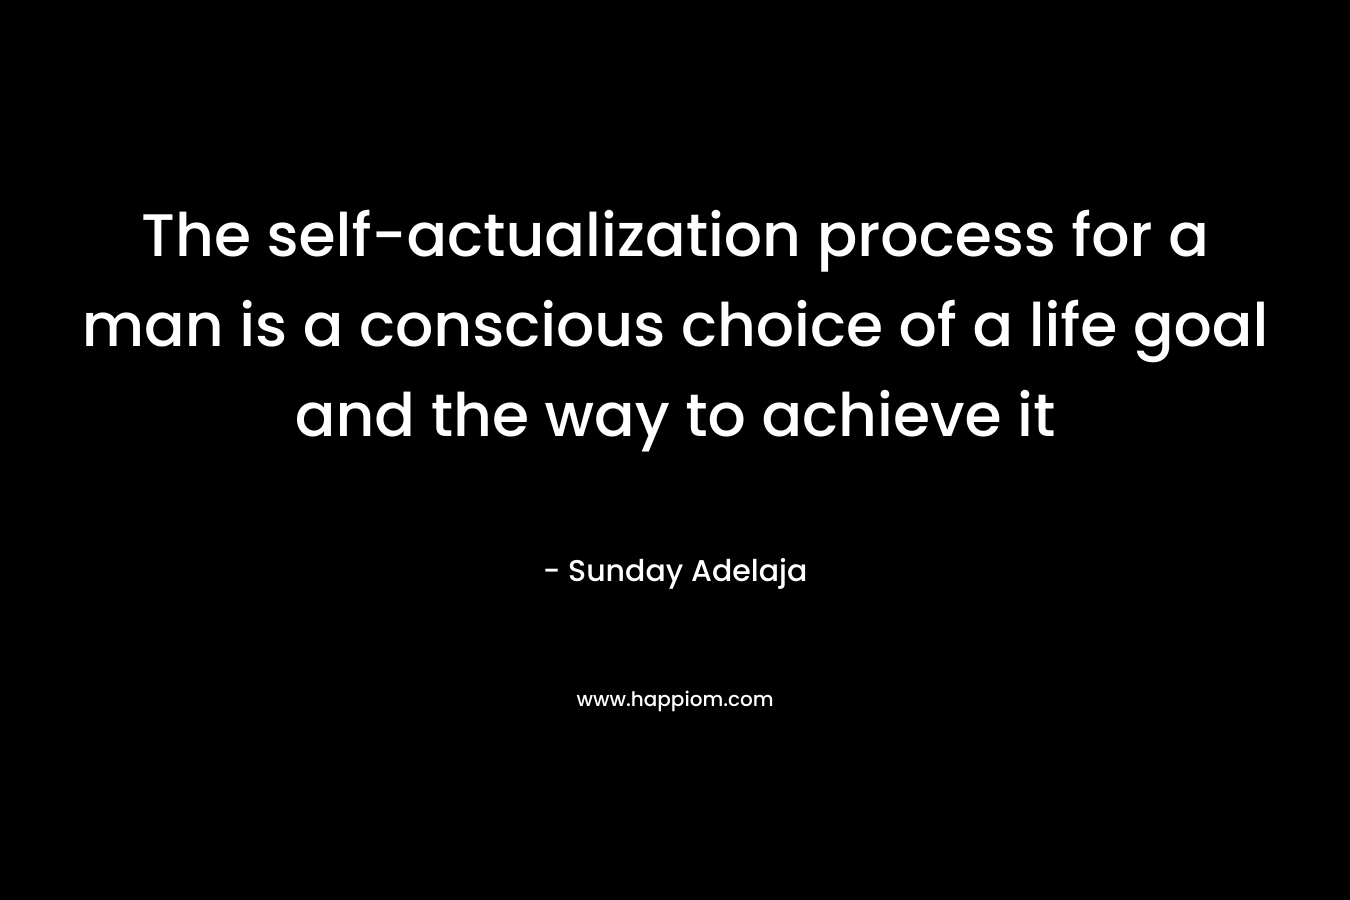 The self-actualization process for a man is a conscious choice of a life goal and the way to achieve it